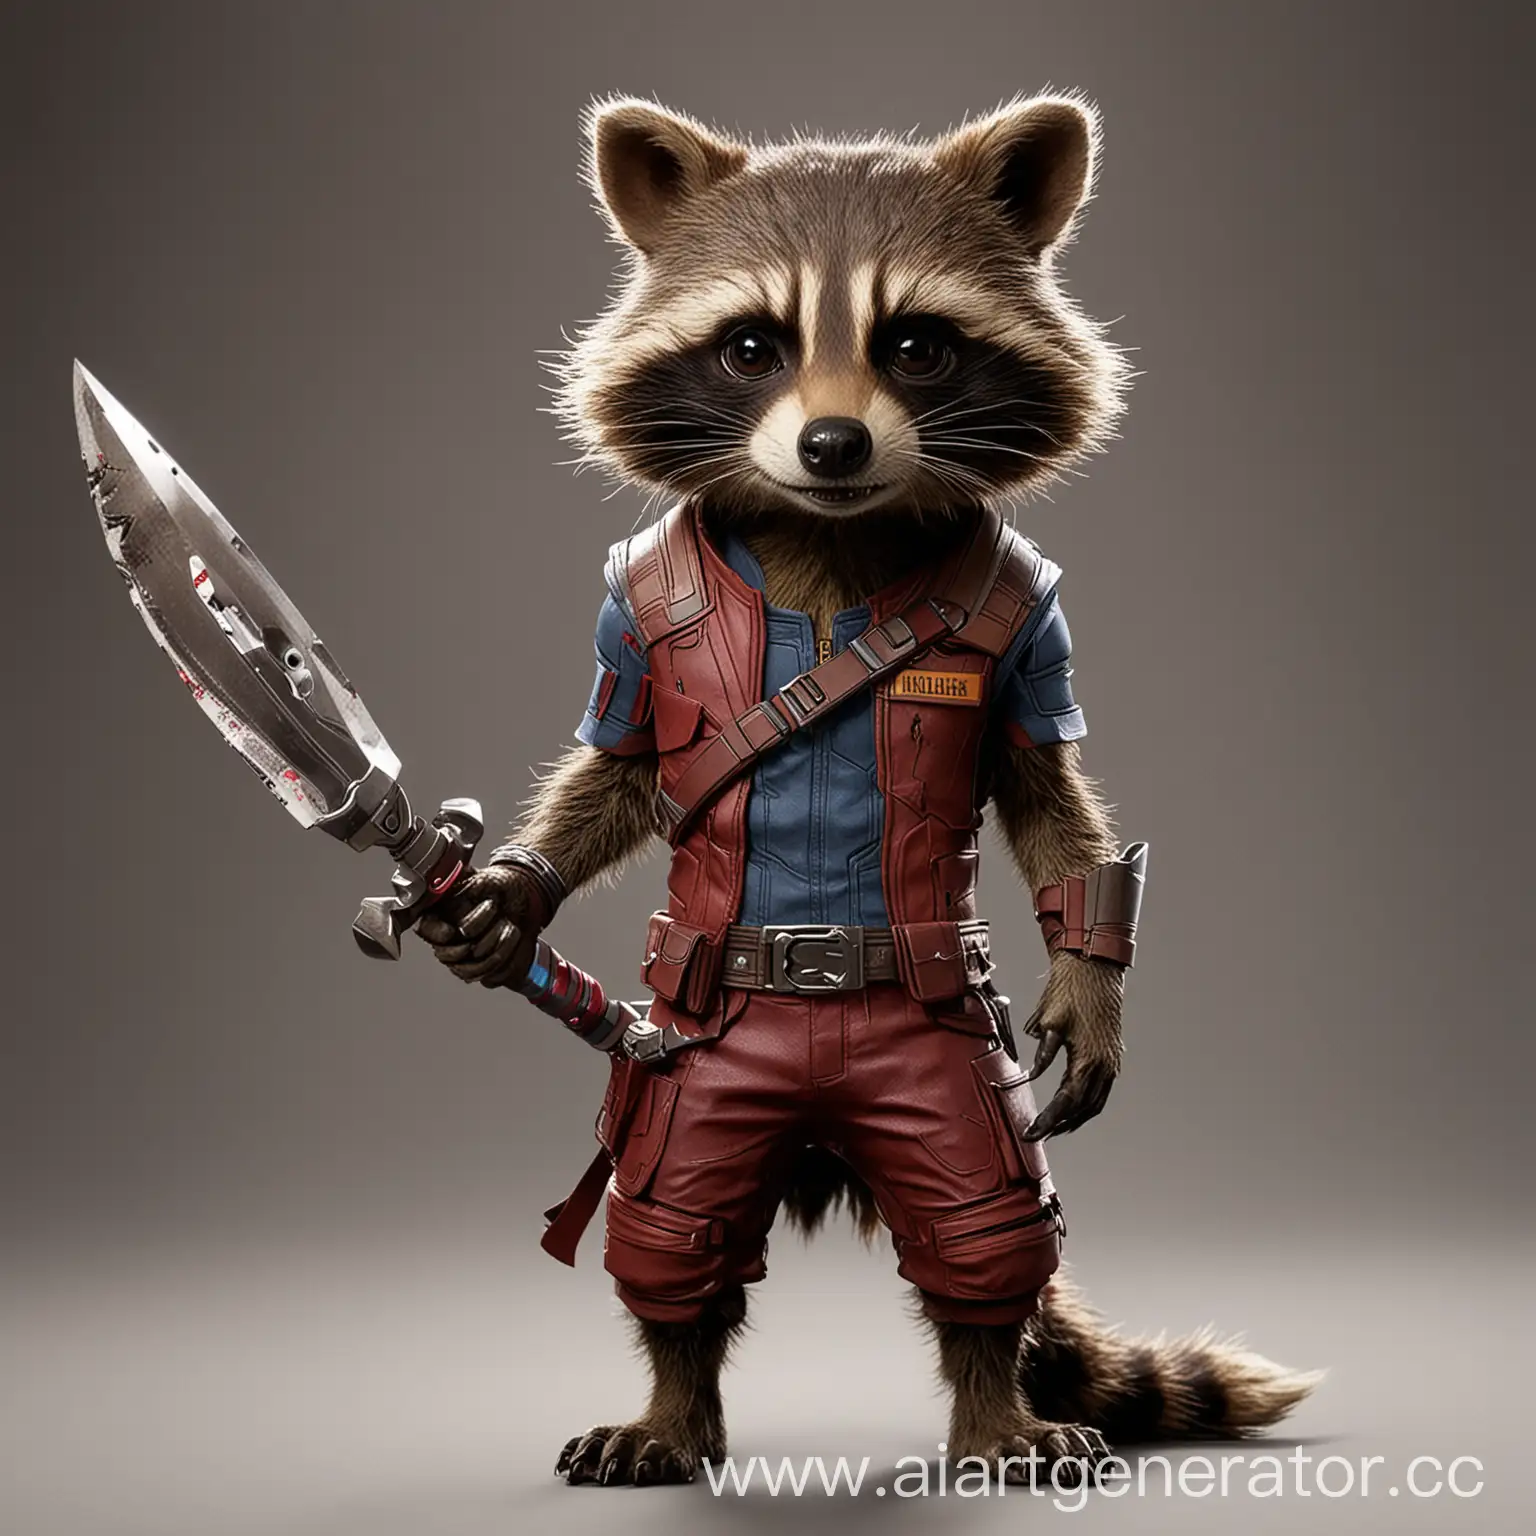 raccoon from Guardians of the Galaxy movie with big scissors